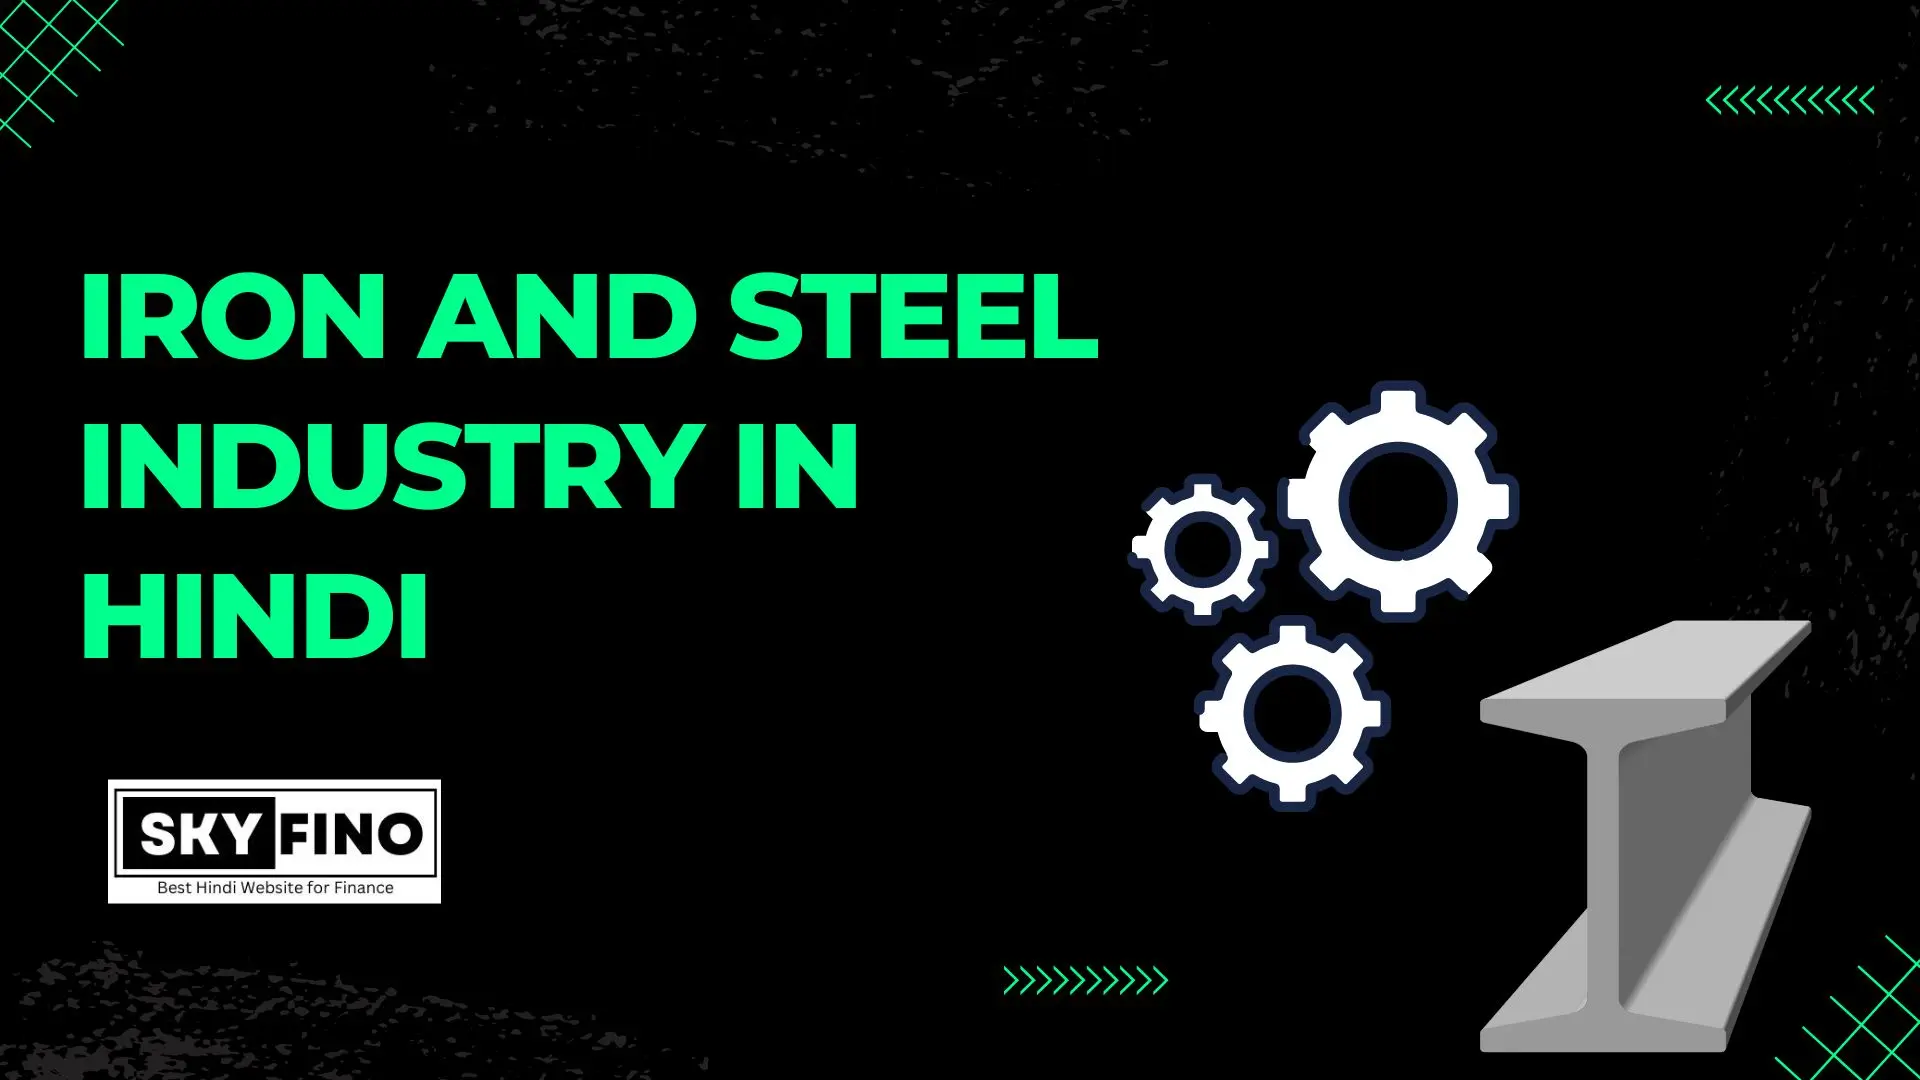 Iron and Steel Industry in Hindi